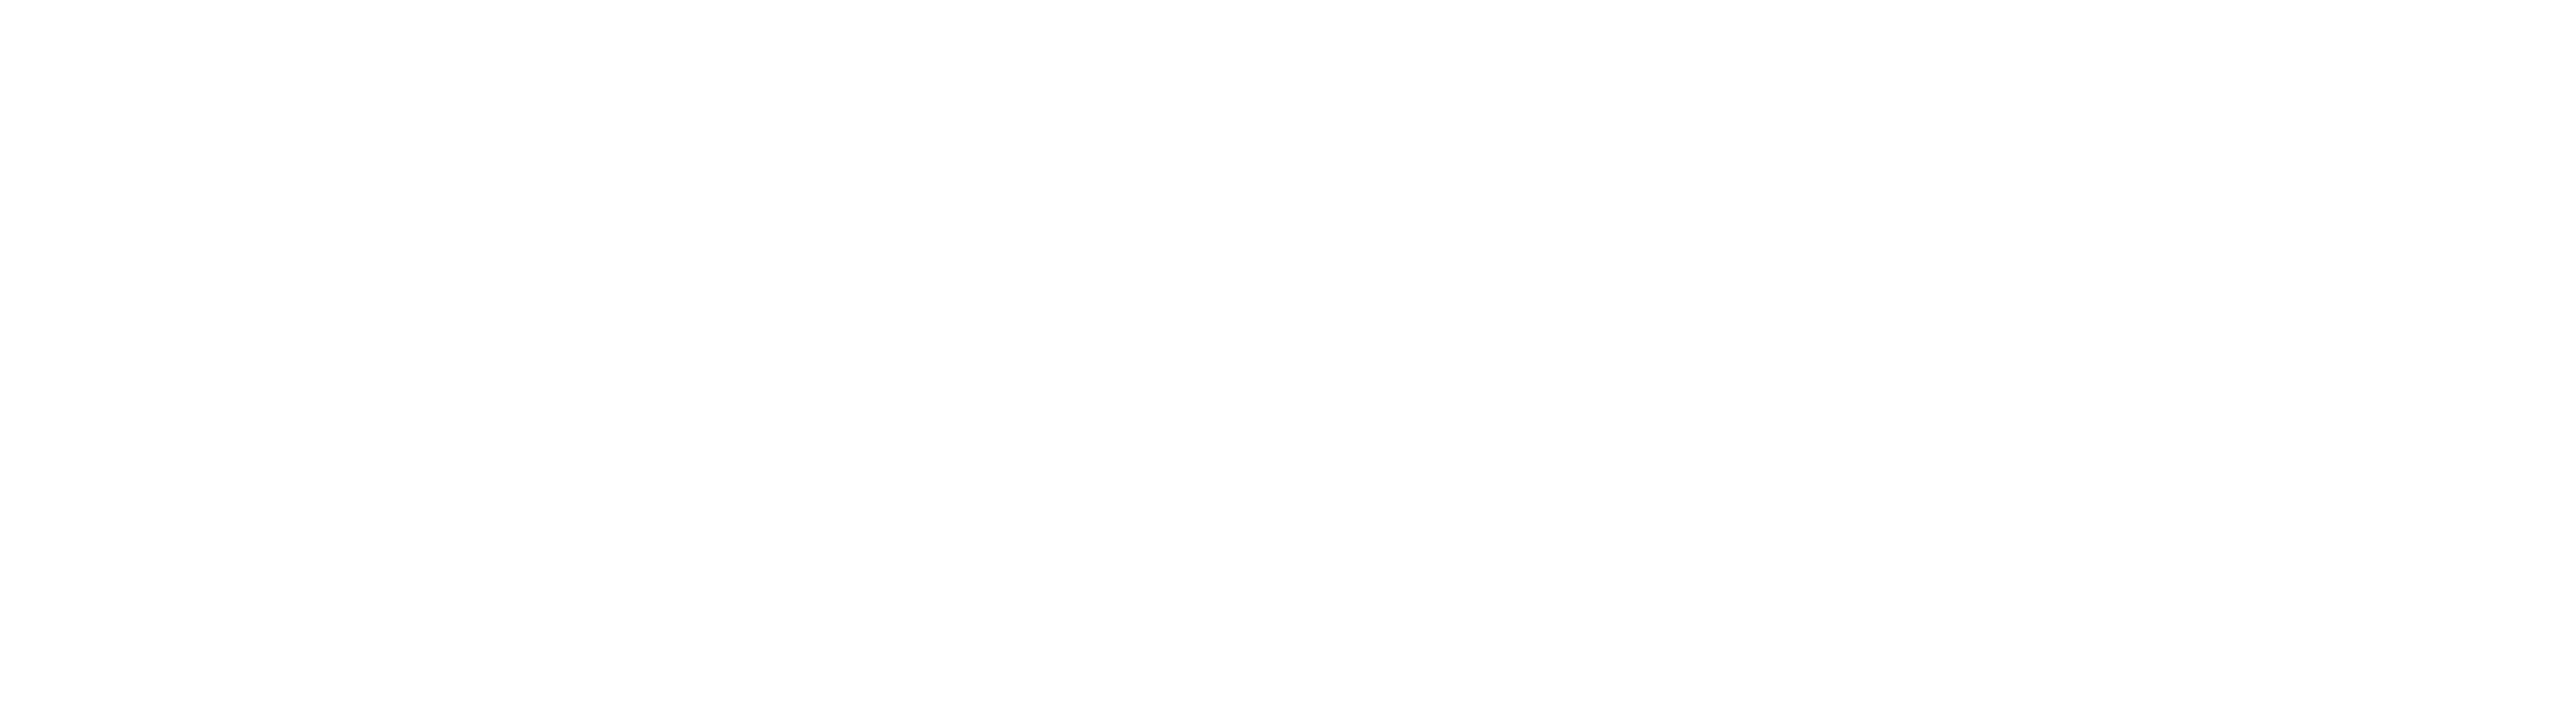 Goodway Group logo